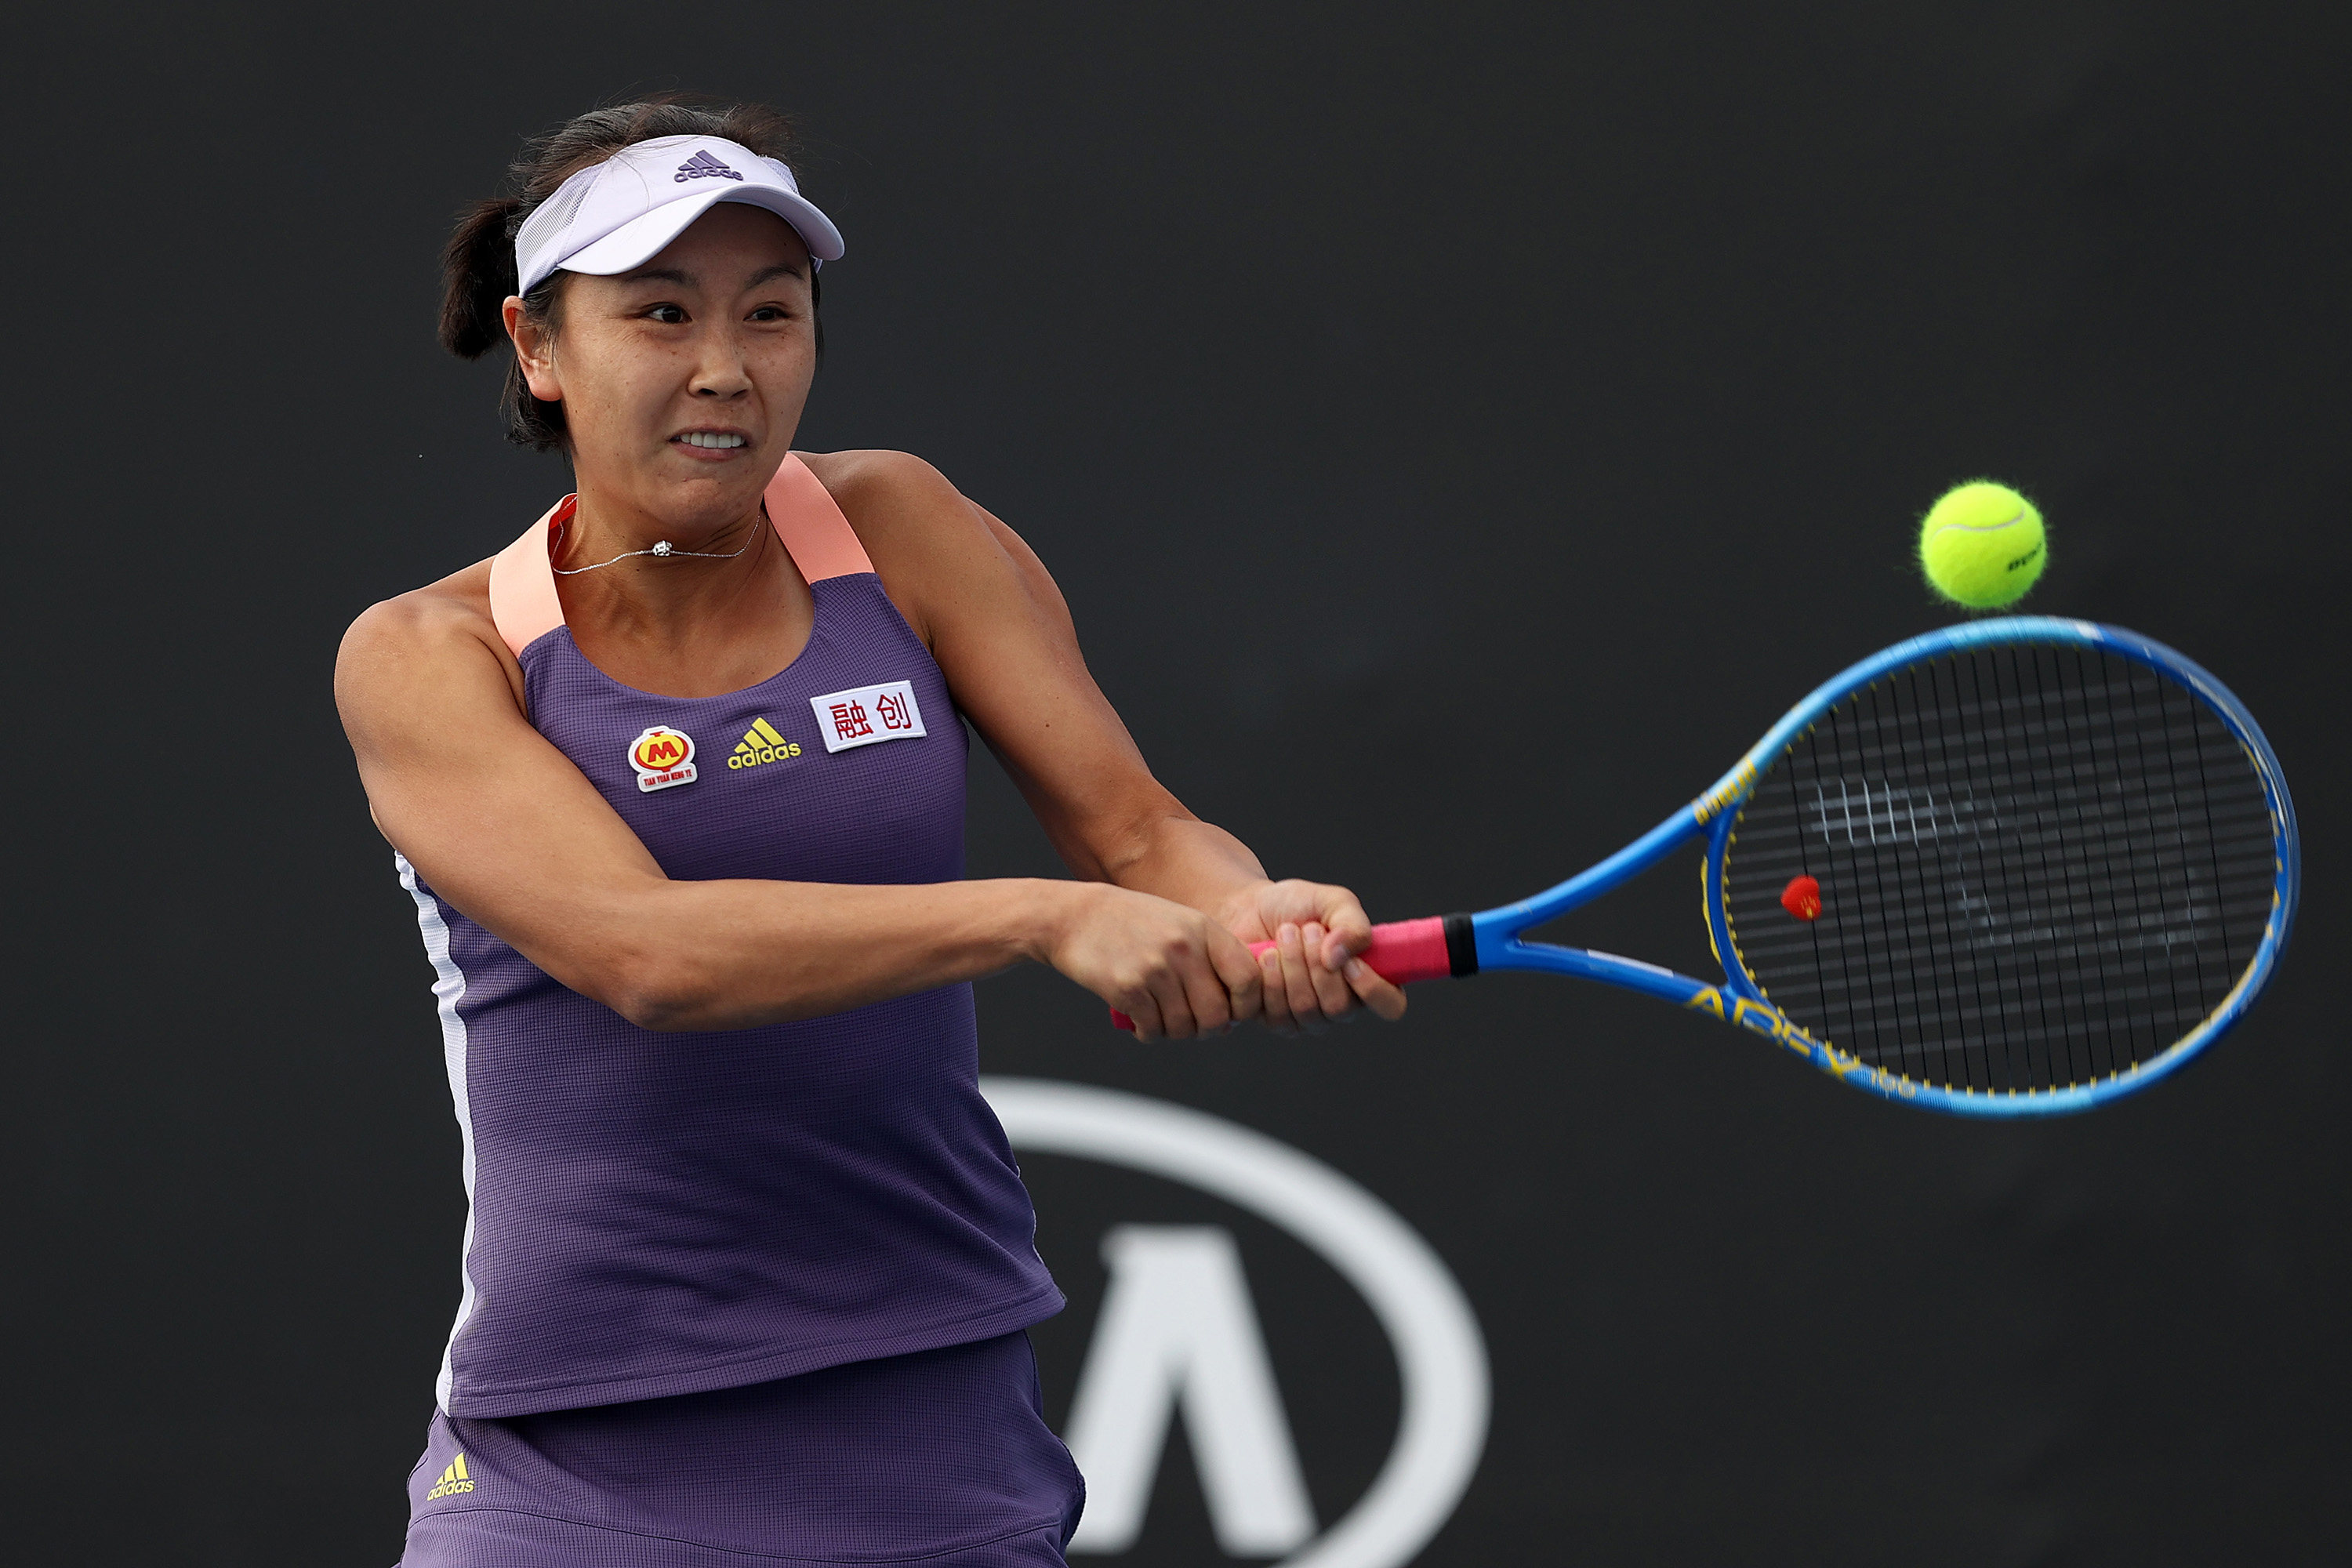 Peng Shuai Peng competing in the Australian Open in January 2020. Photo: Getty Images/TNS